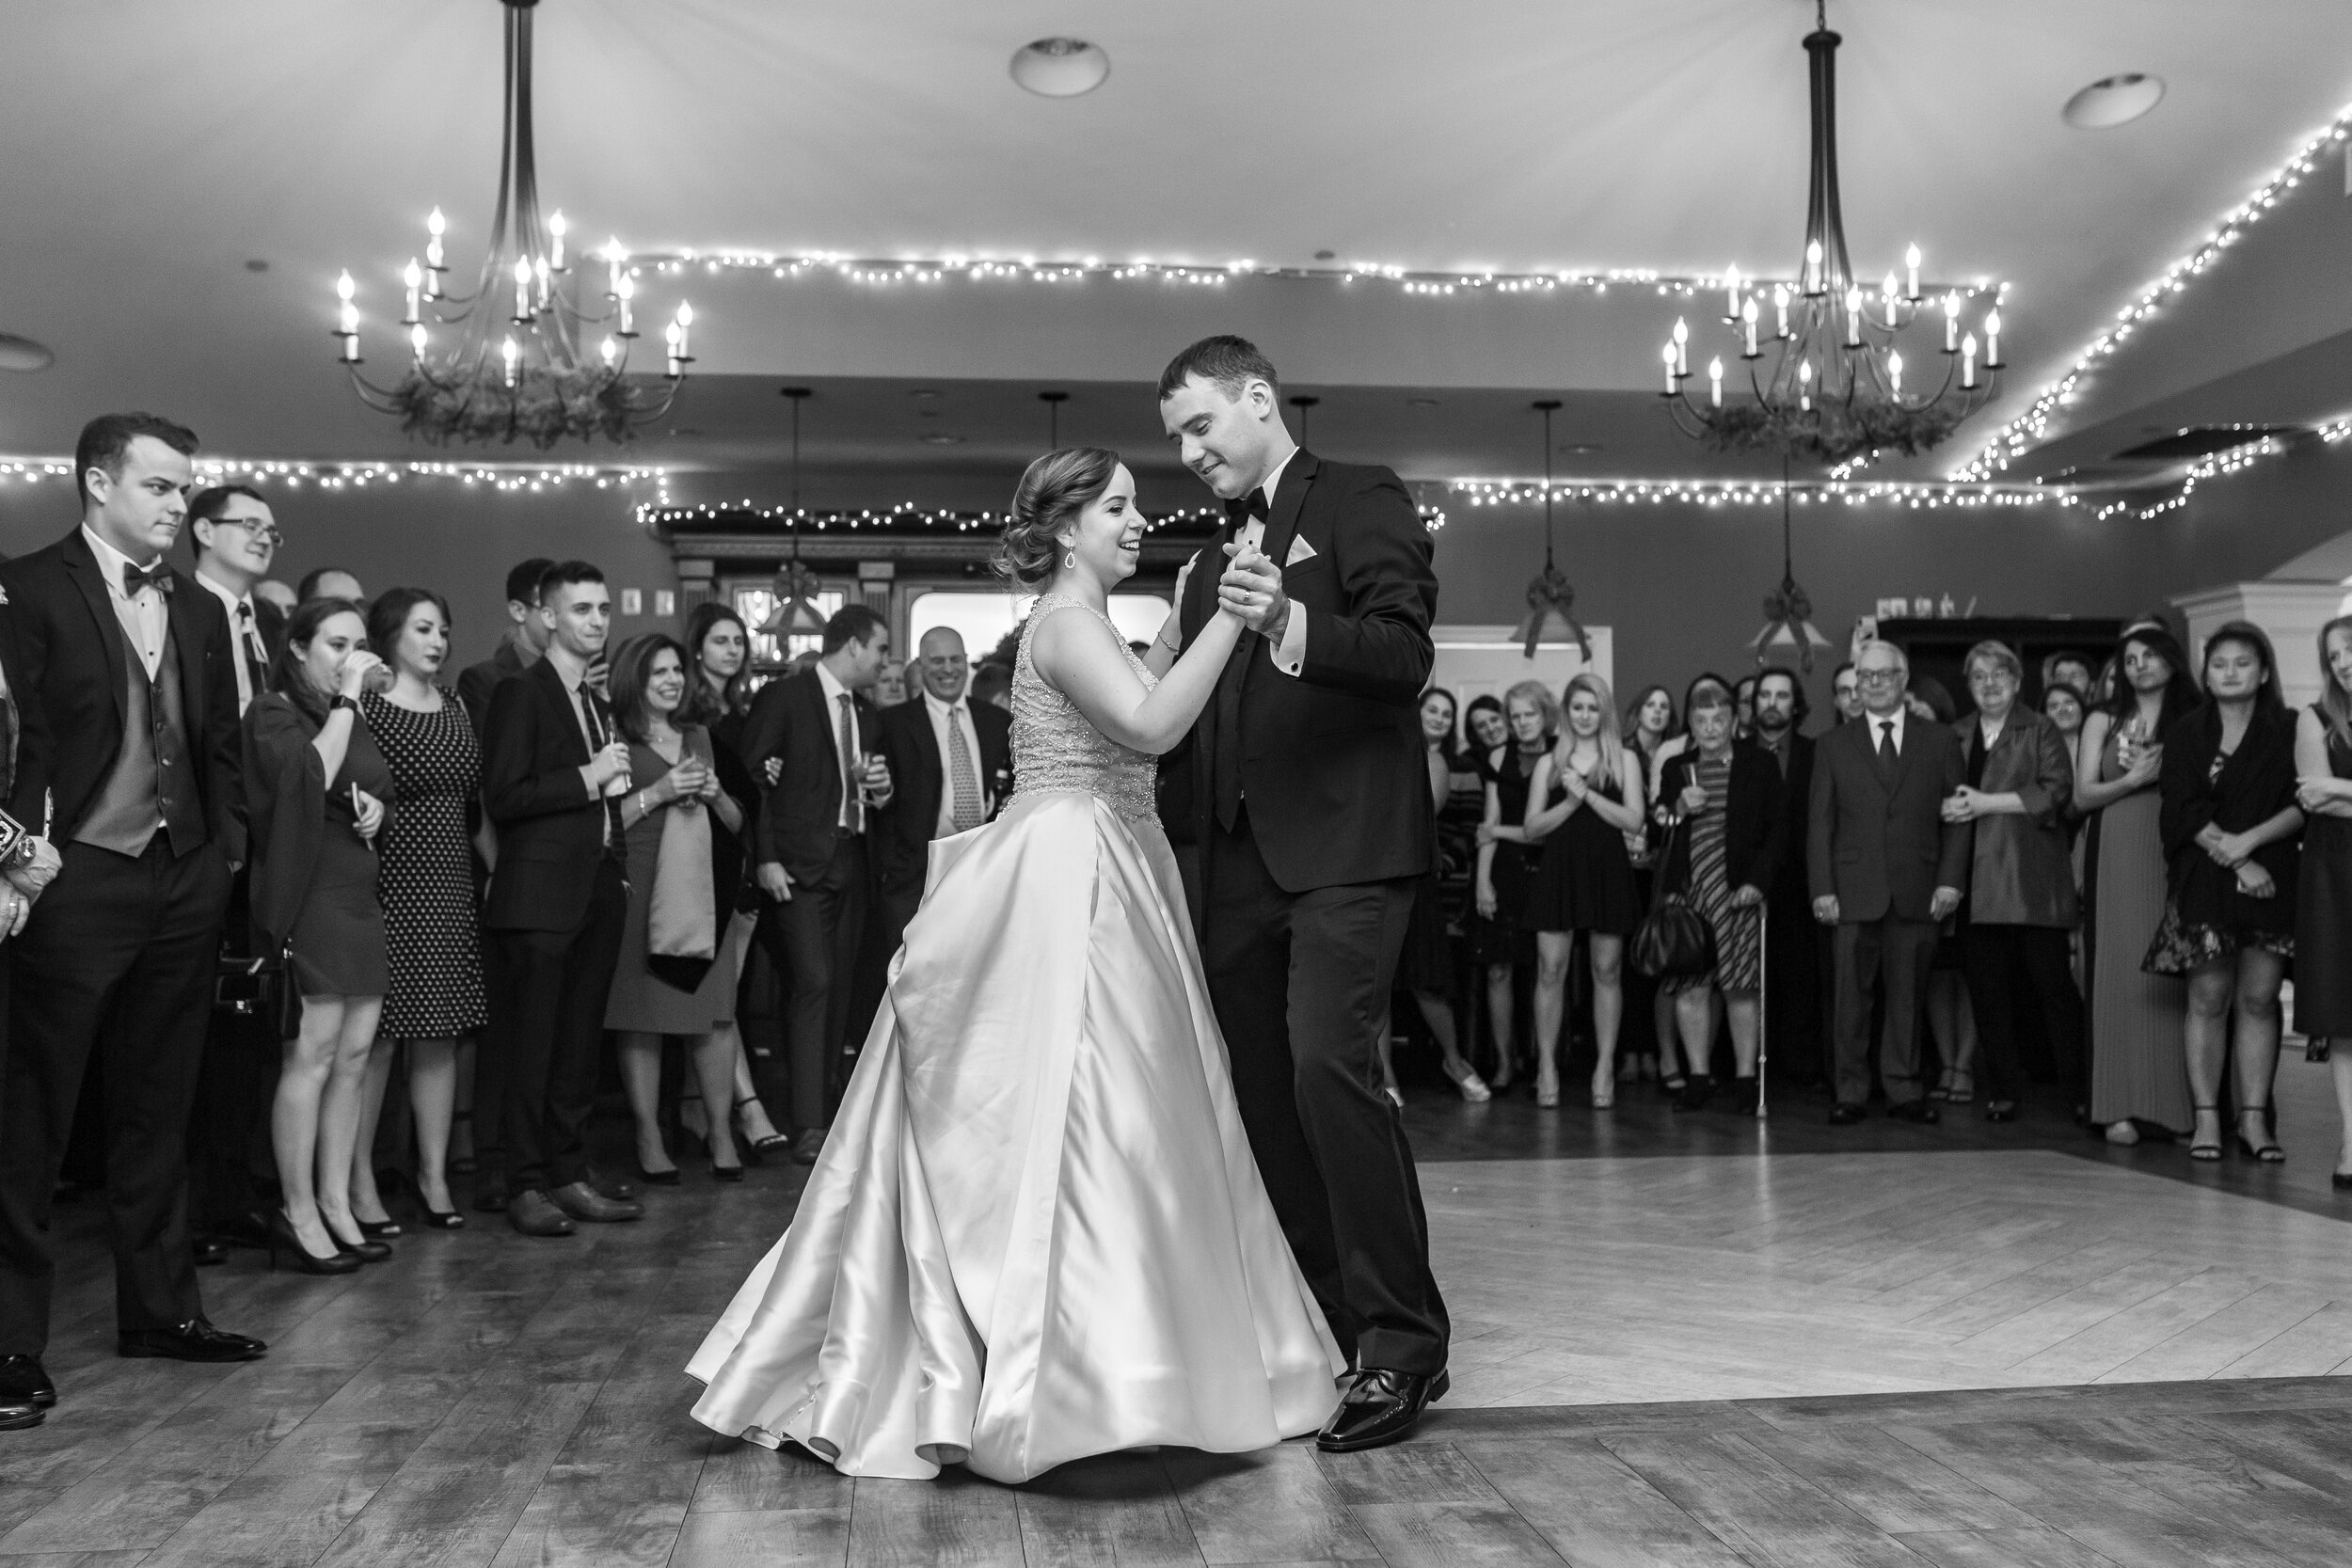 First dance bride and groom at ospreys belmont bay